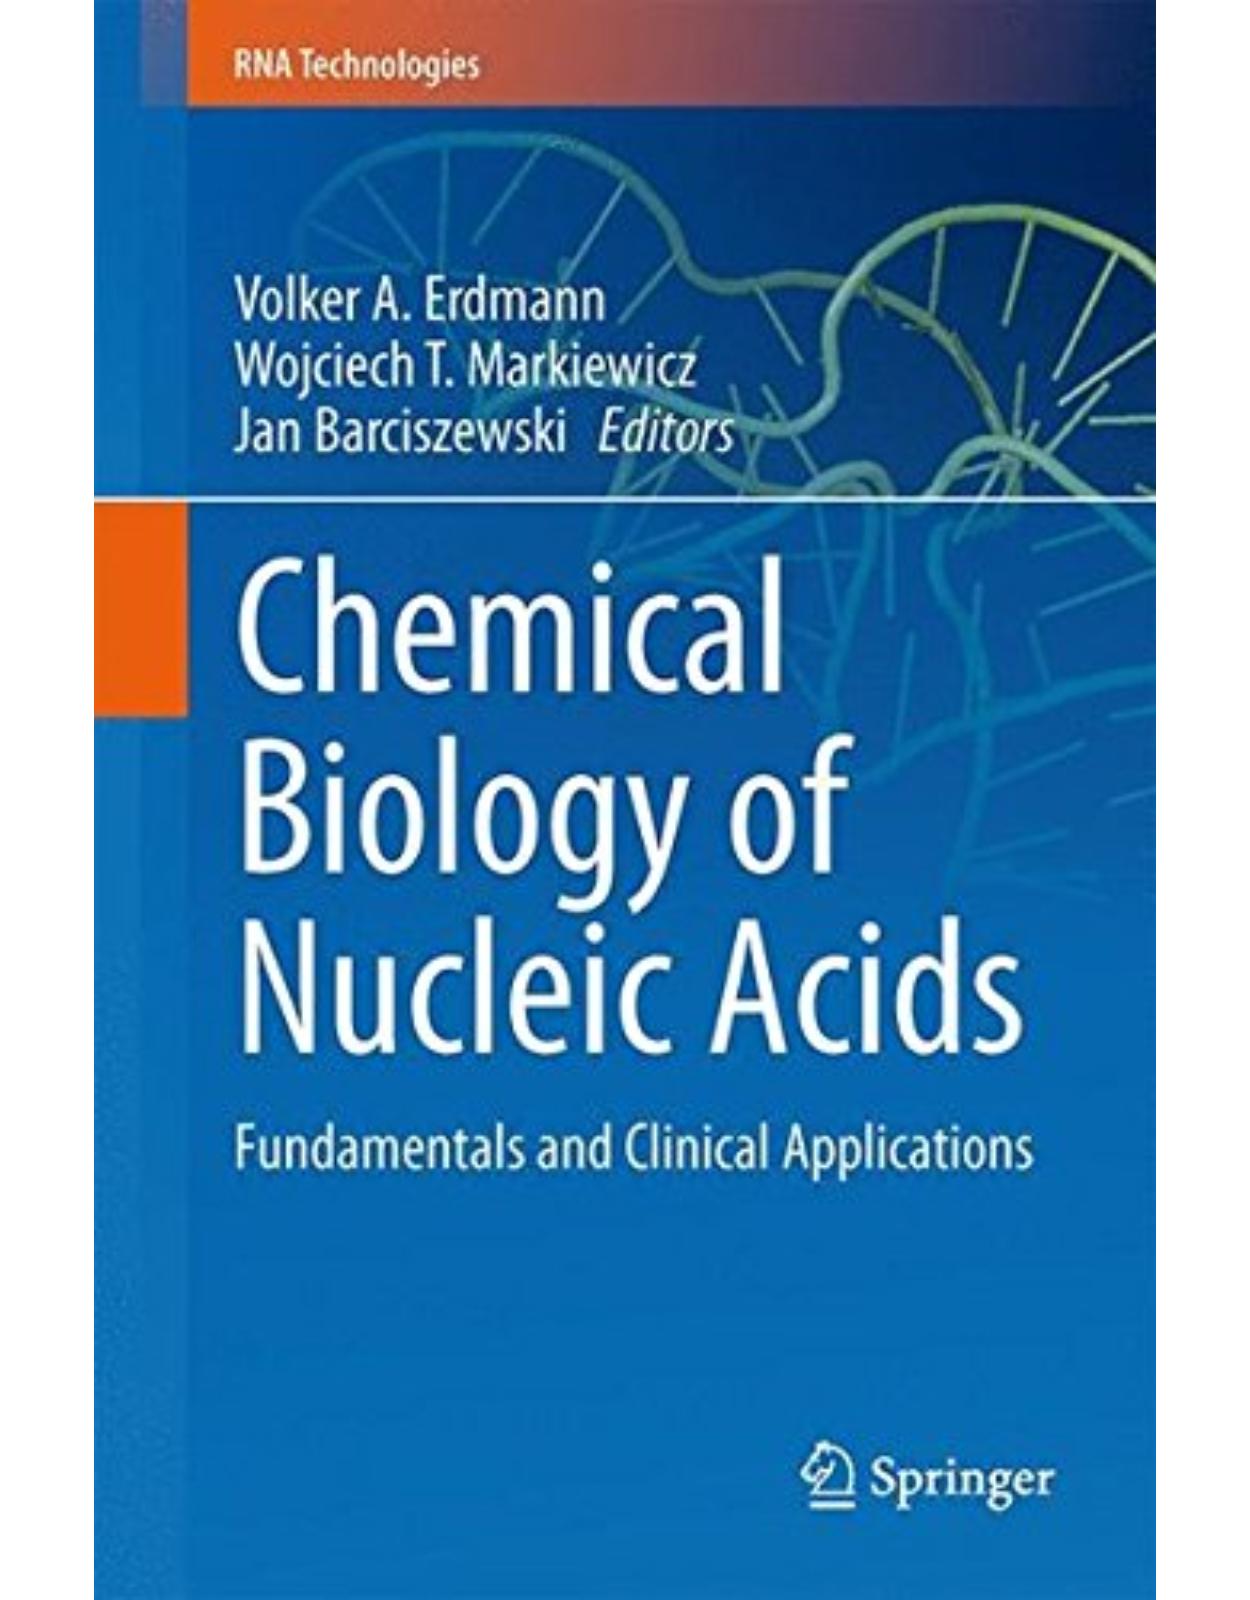 Chemical Biology of Nucleic Acids: Fundamentals and Clinical Applications